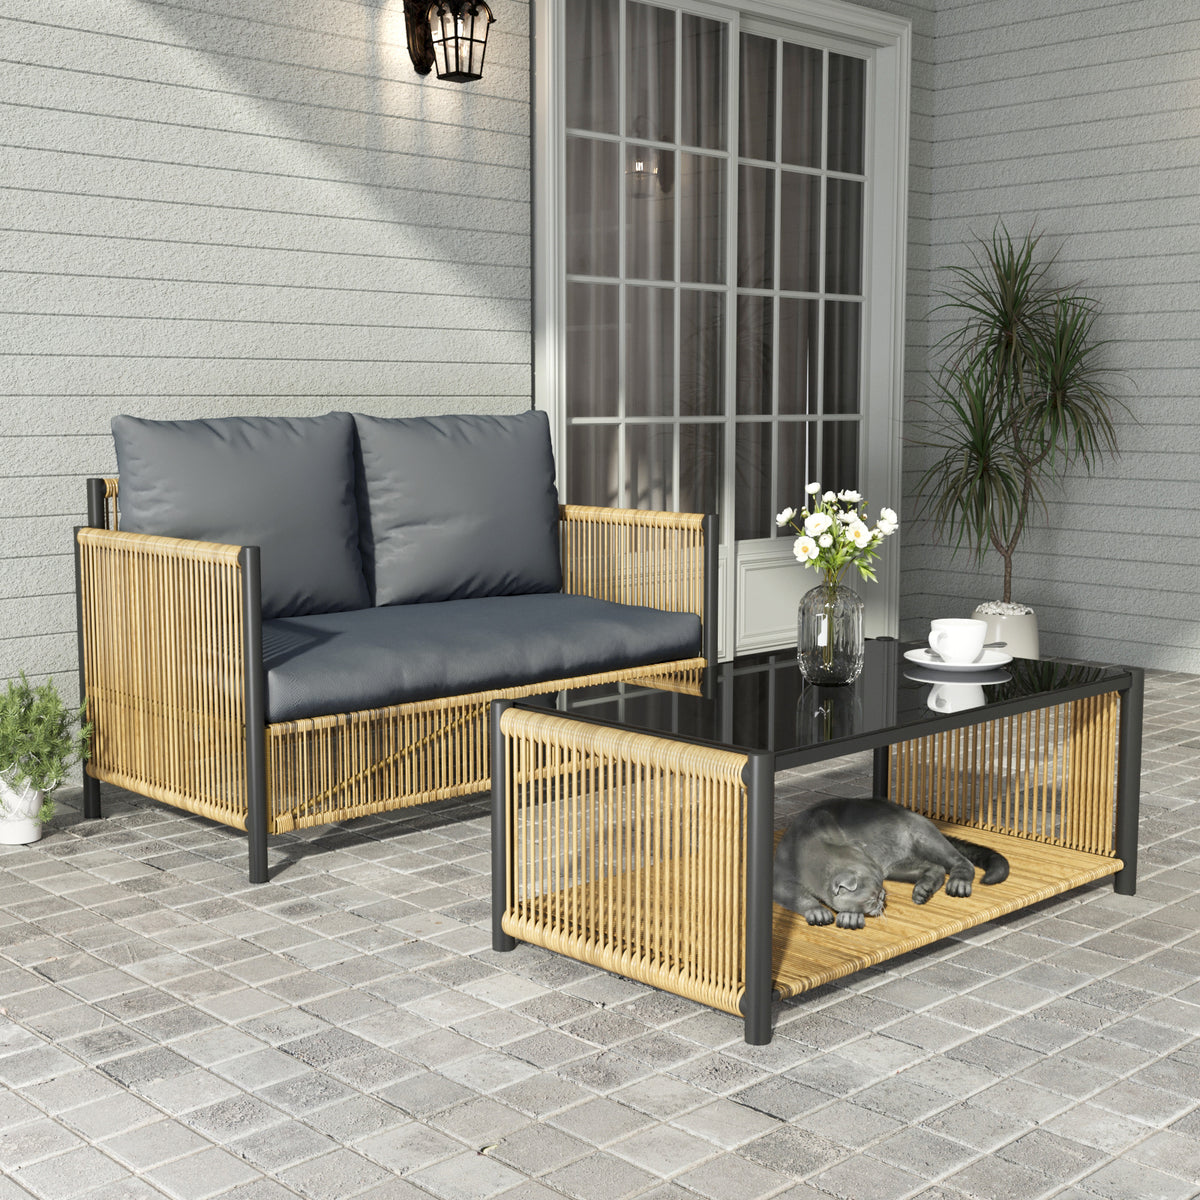 Outdoor Brown Wicker Sofa with Grey Cushion and Table Set